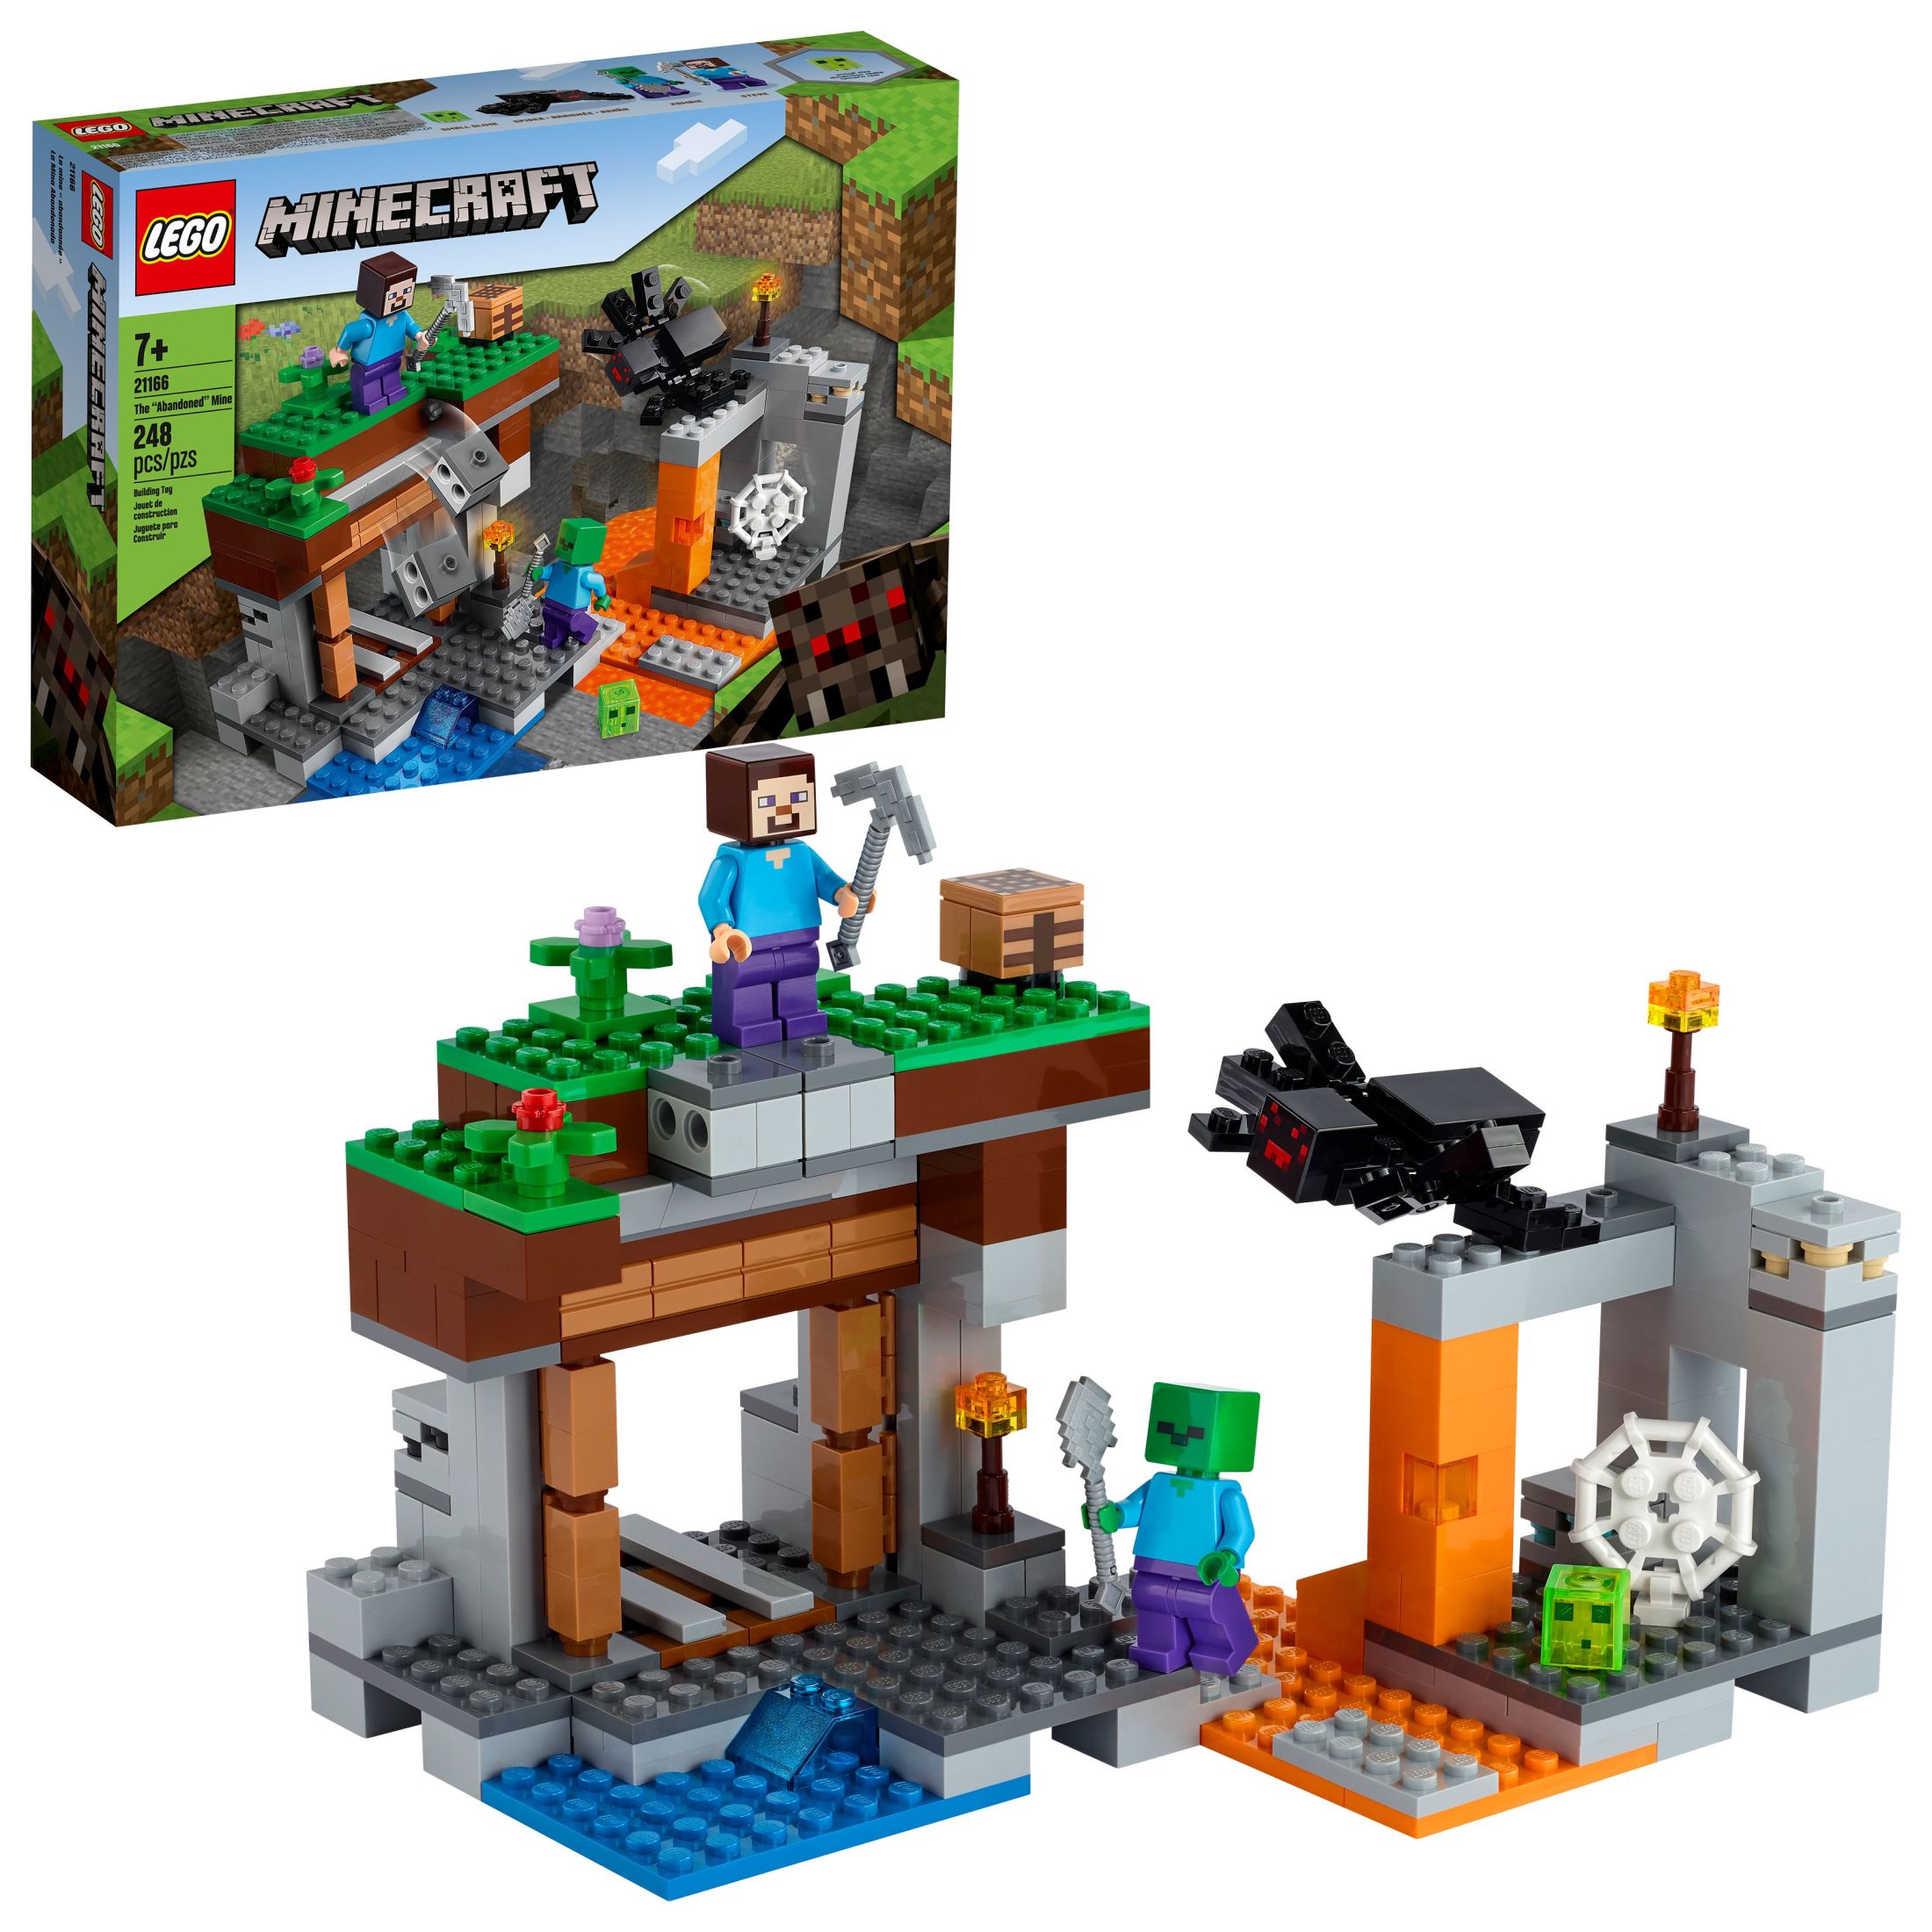 LEGO Minecraft The Abandoned Mine Building Toy, 21166 Zombie Cave with Slime, Steve & Spider Figures, Gift idea for Kids, Boys and Girls Age 7 plus - image 1 of 8